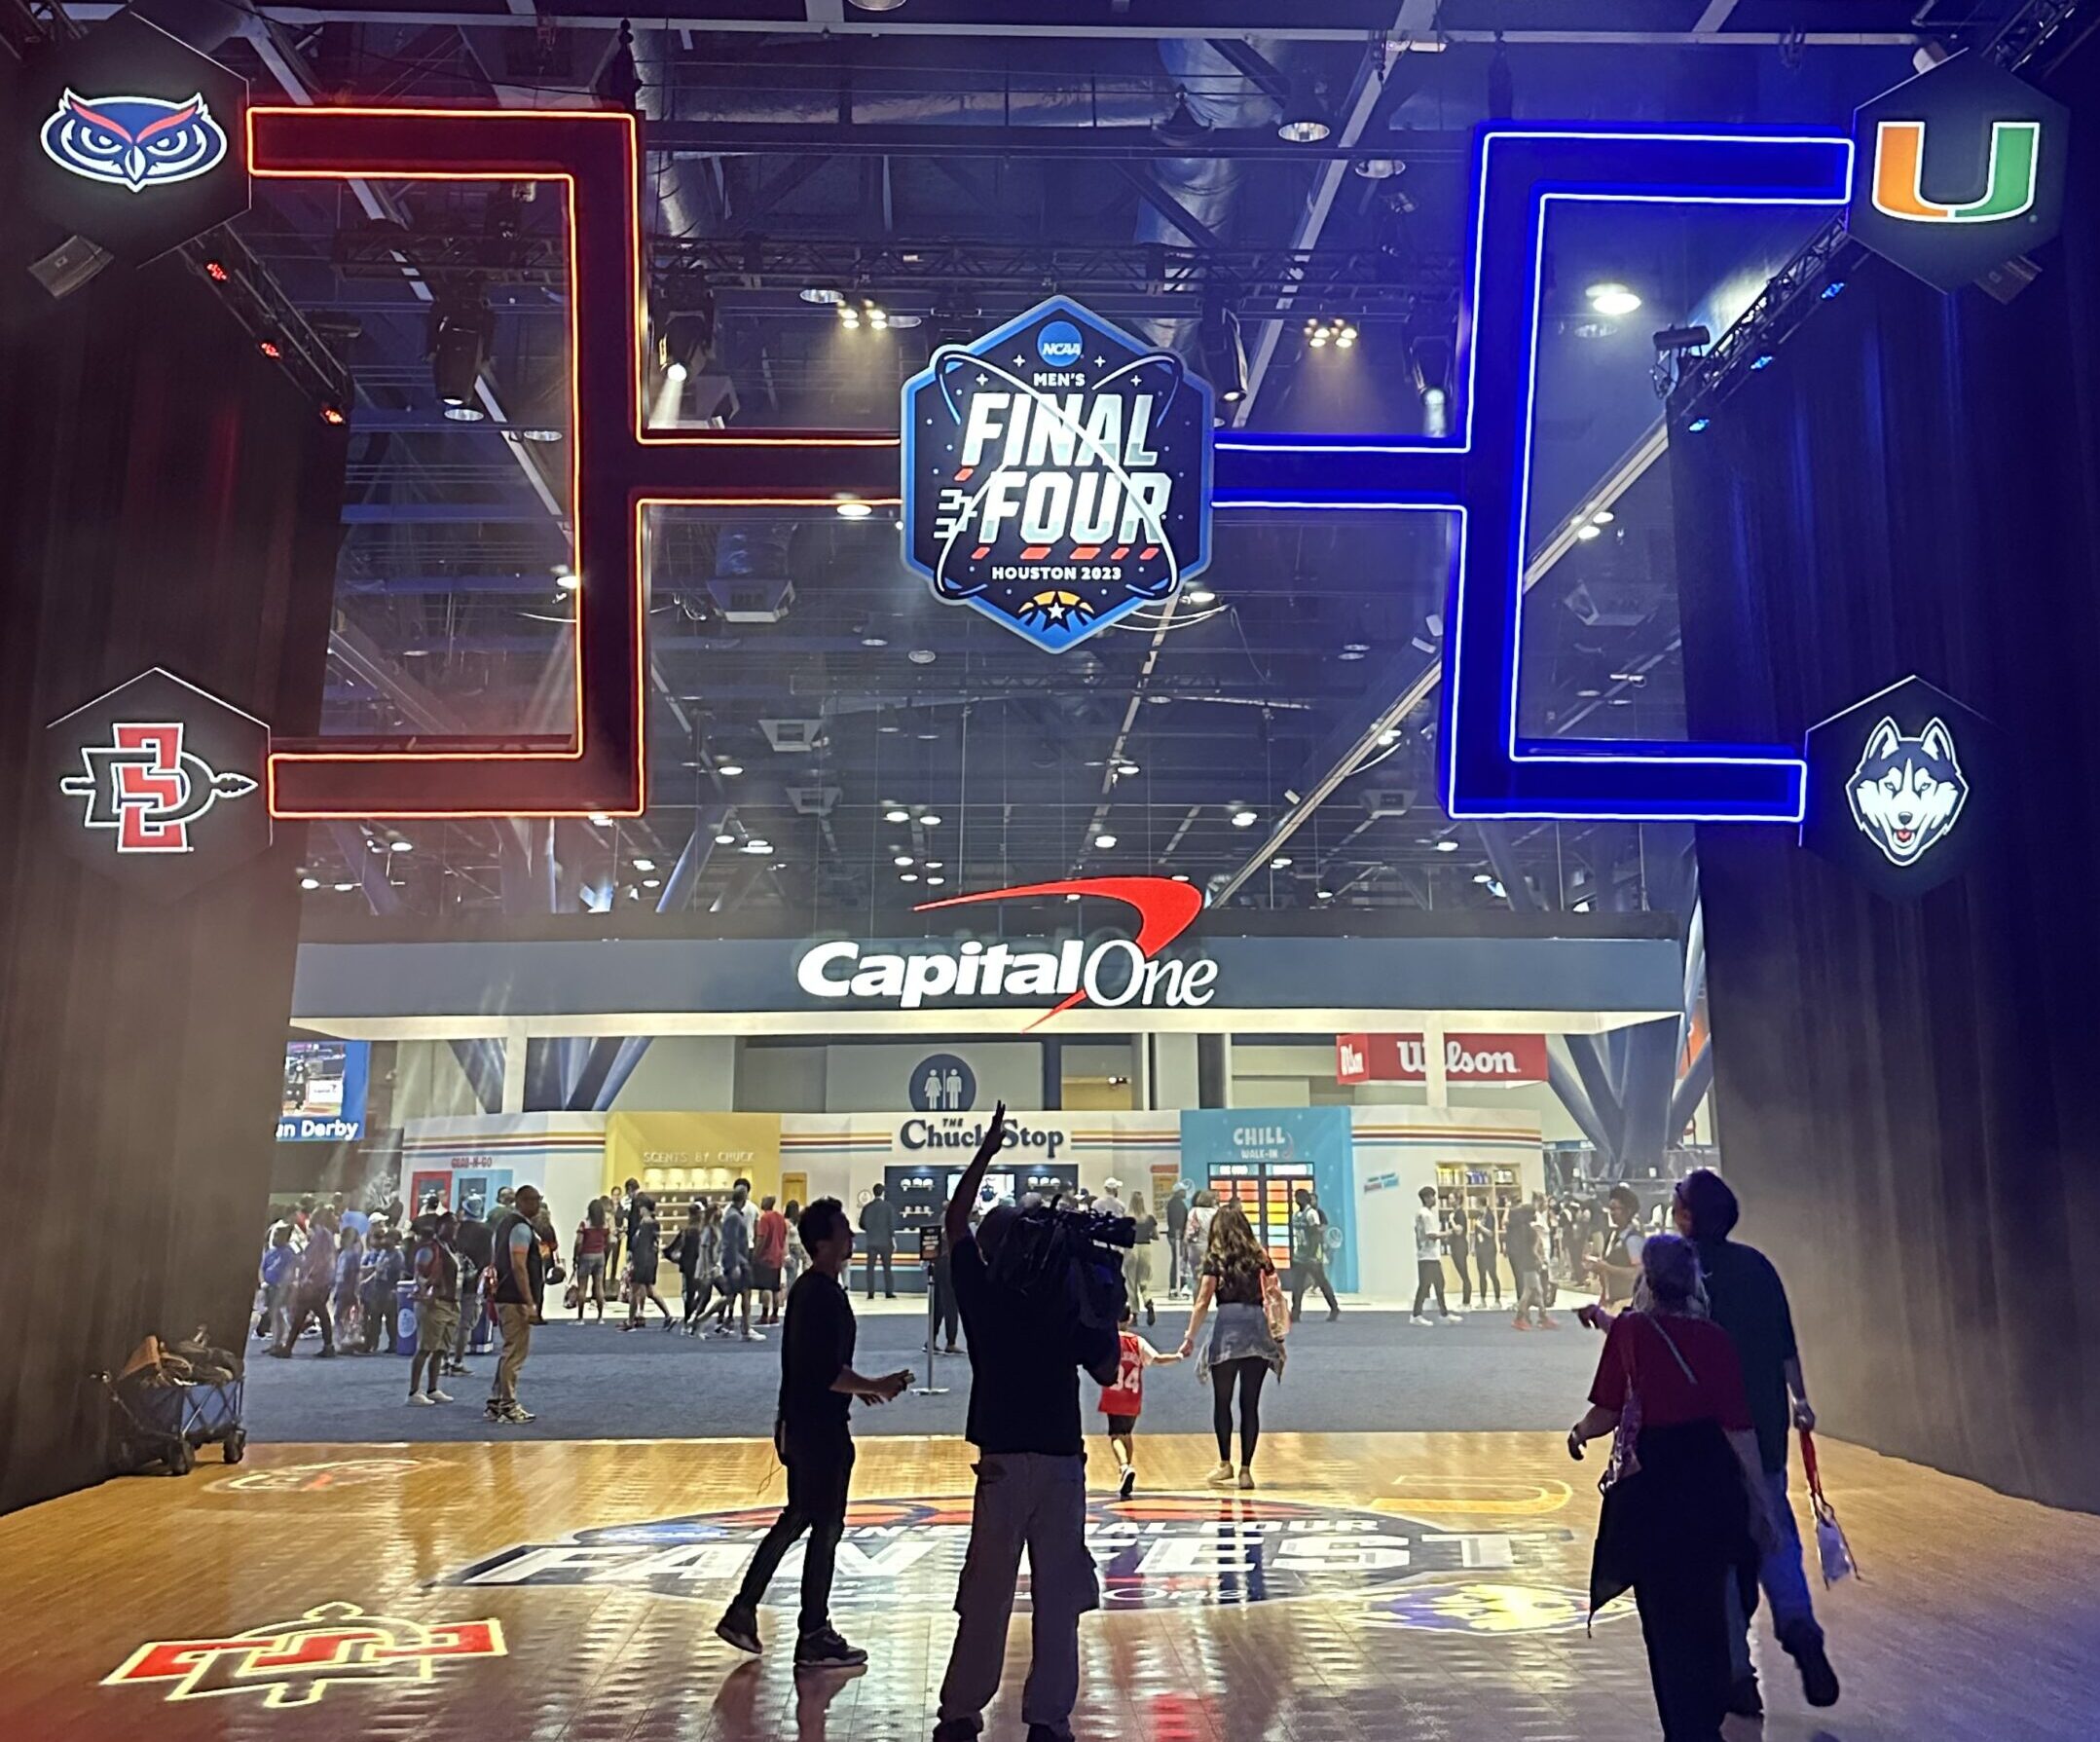 2023 Mens Final Four weekend kicks off in Houston with Fan Fest, concerts at Discovery Green